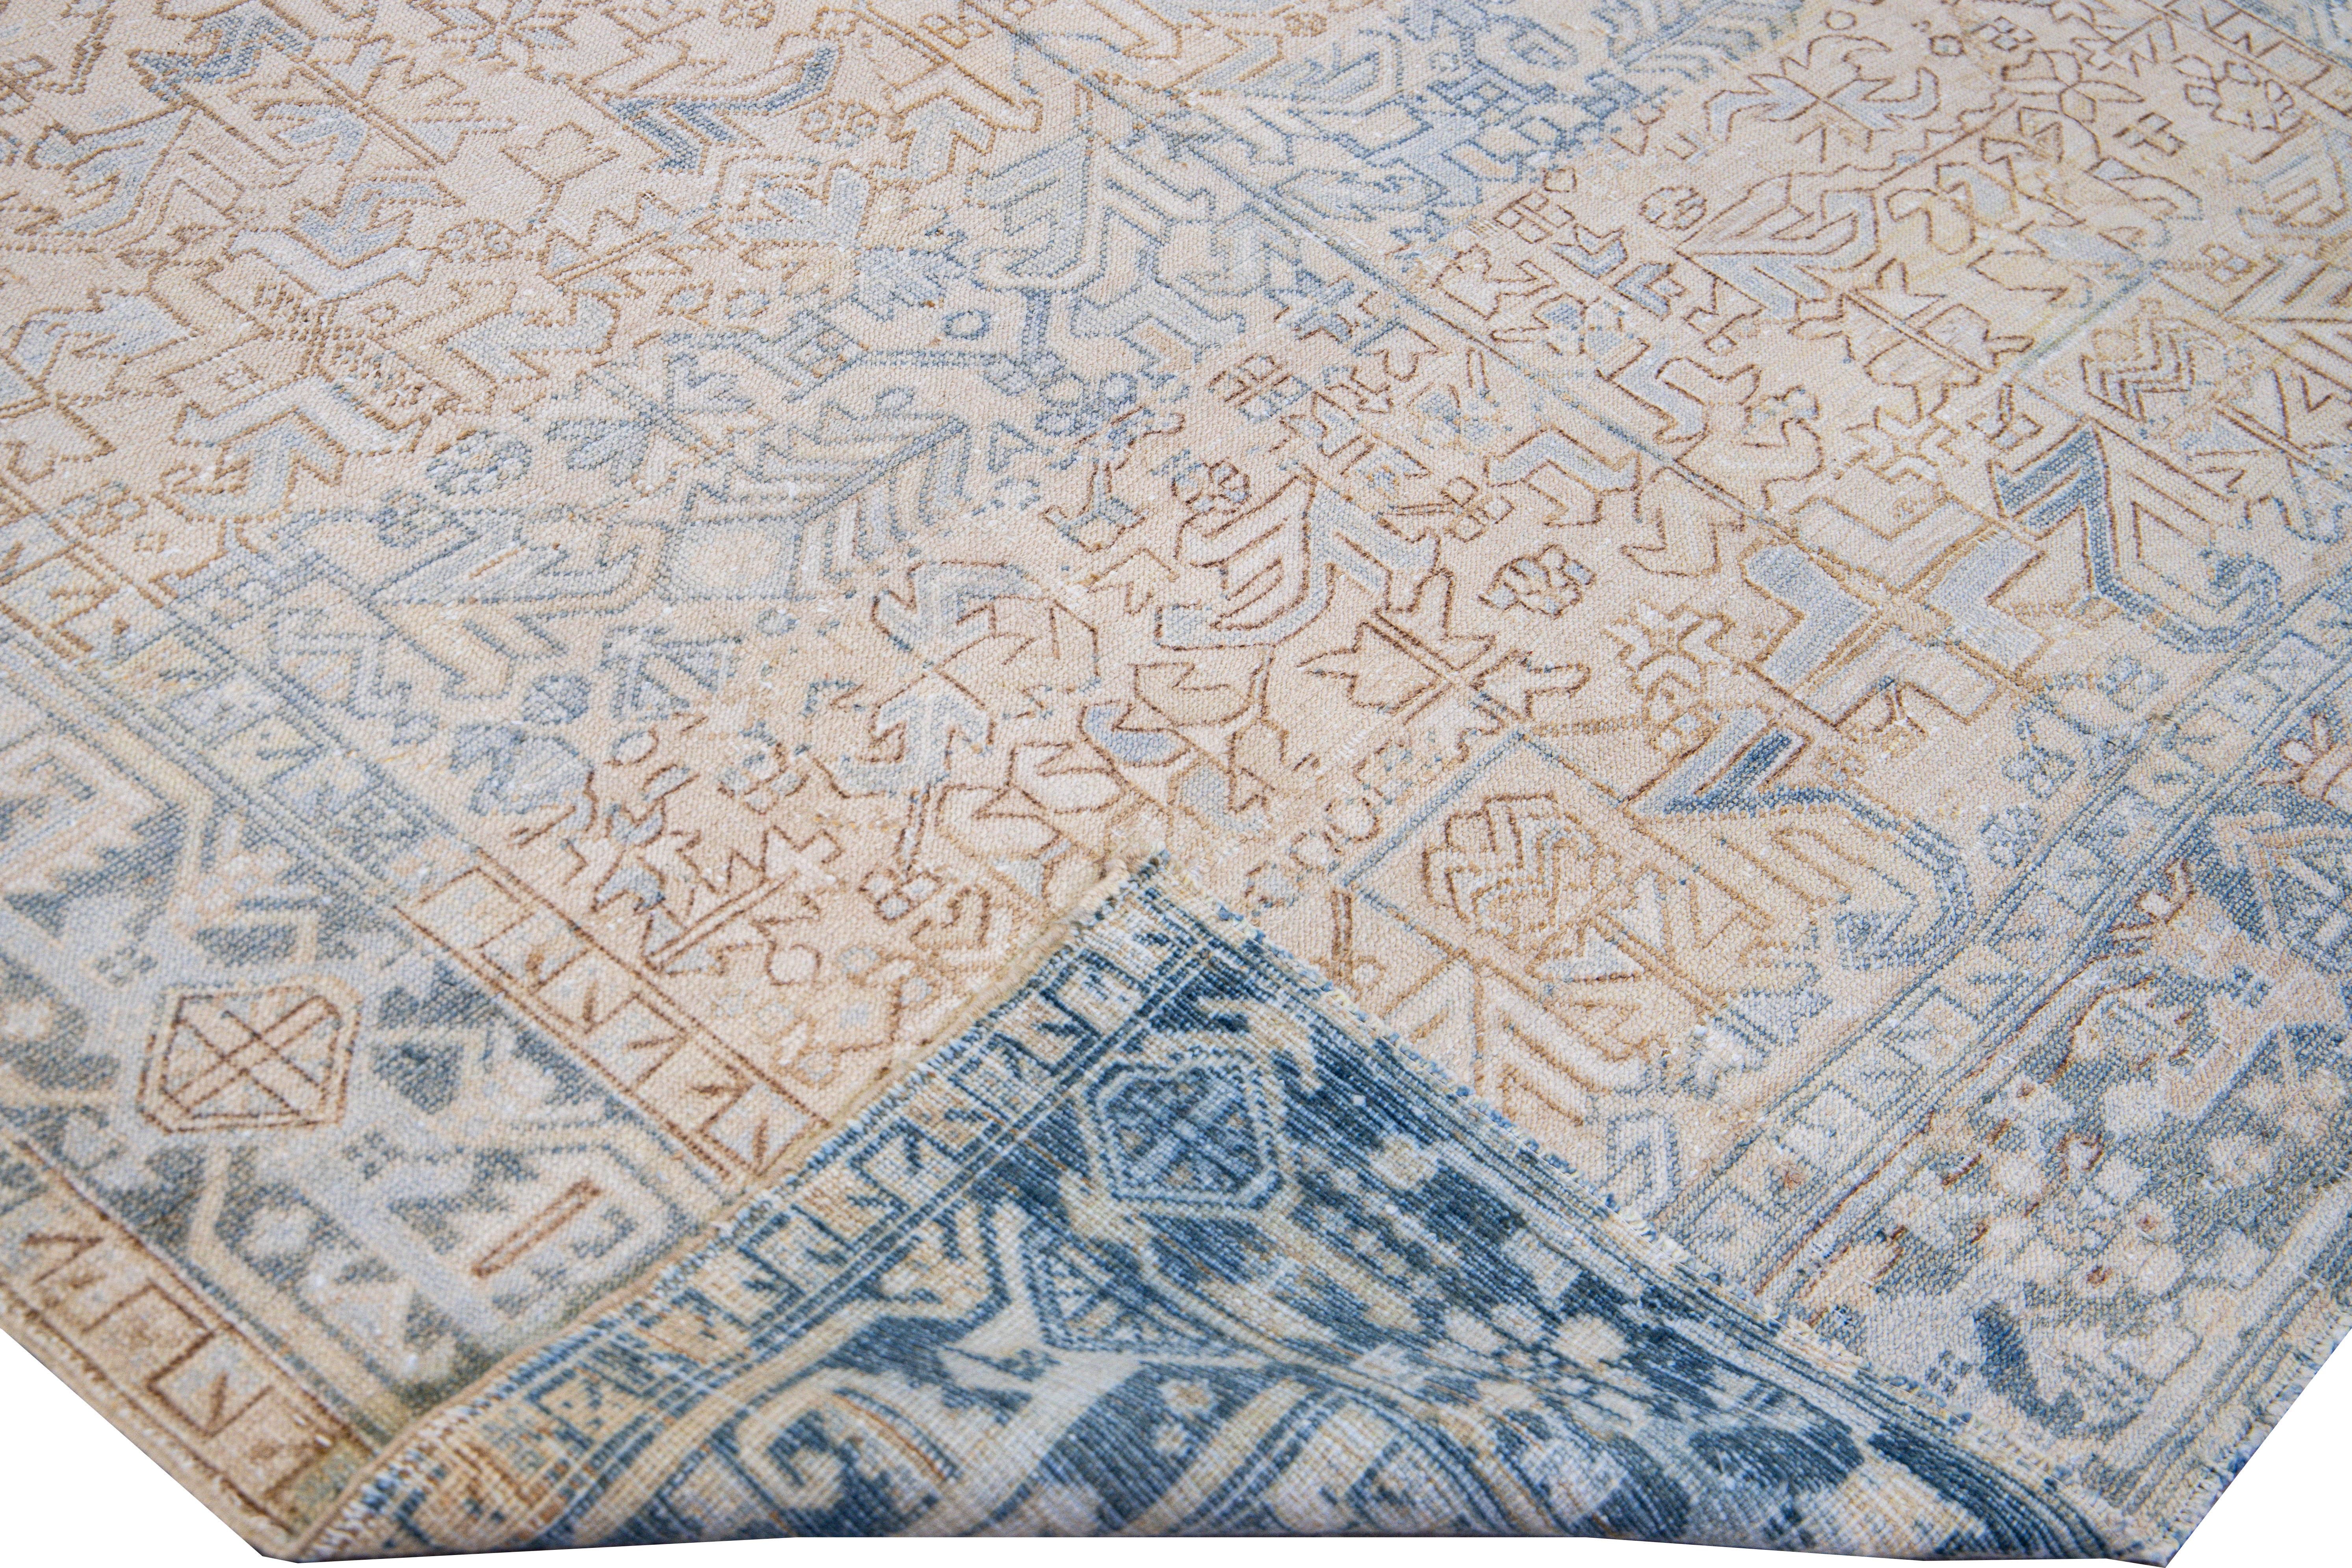 Beautiful antique Heriz hand-knotted wool rug with a beige field. This Persian rug has a blue frame and accents in a gorgeous all-over geometric floral motif.

This rug measures: 7'1